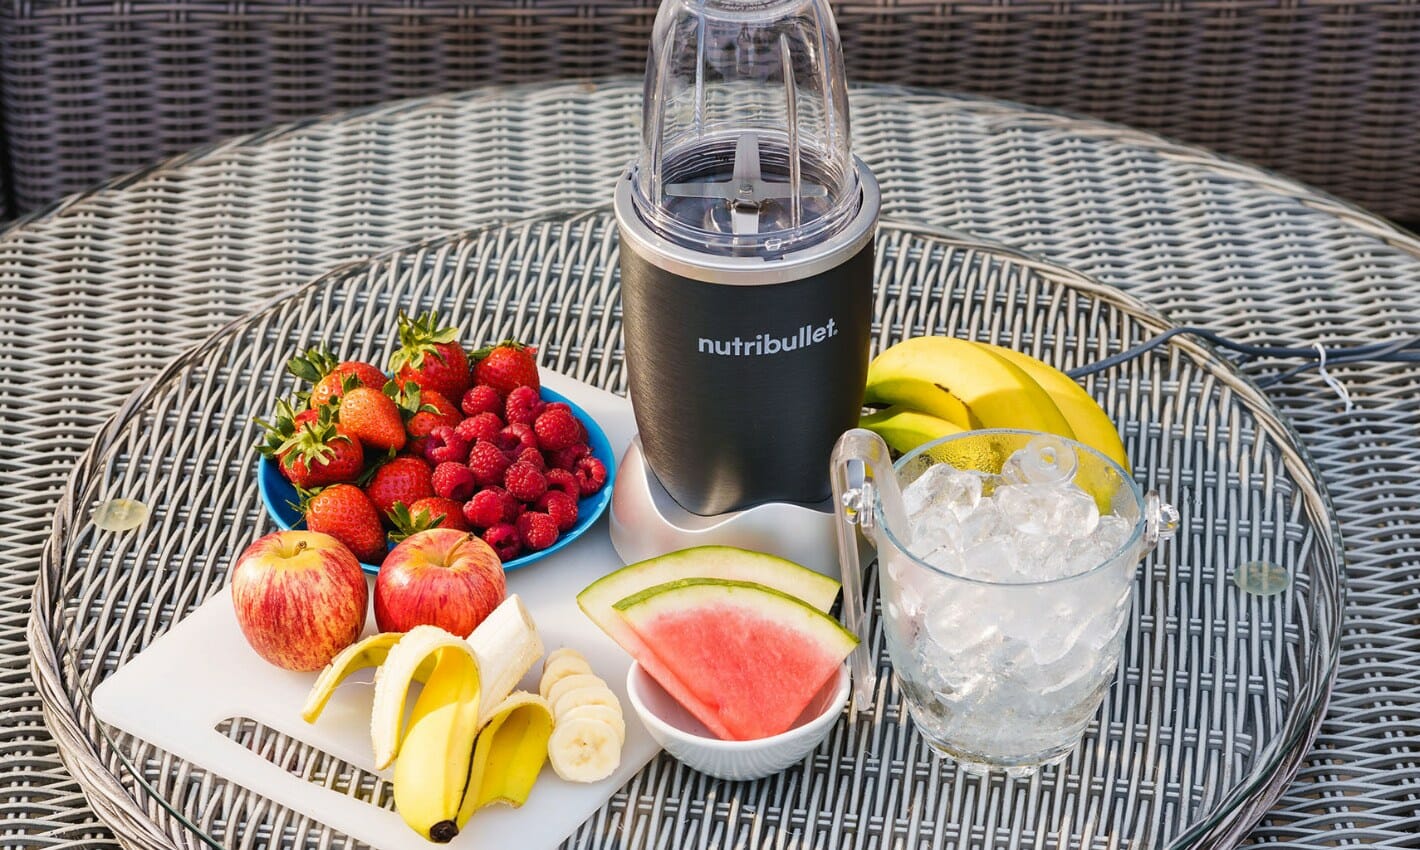 Picture of a Nutribullet with fruit surrounding it